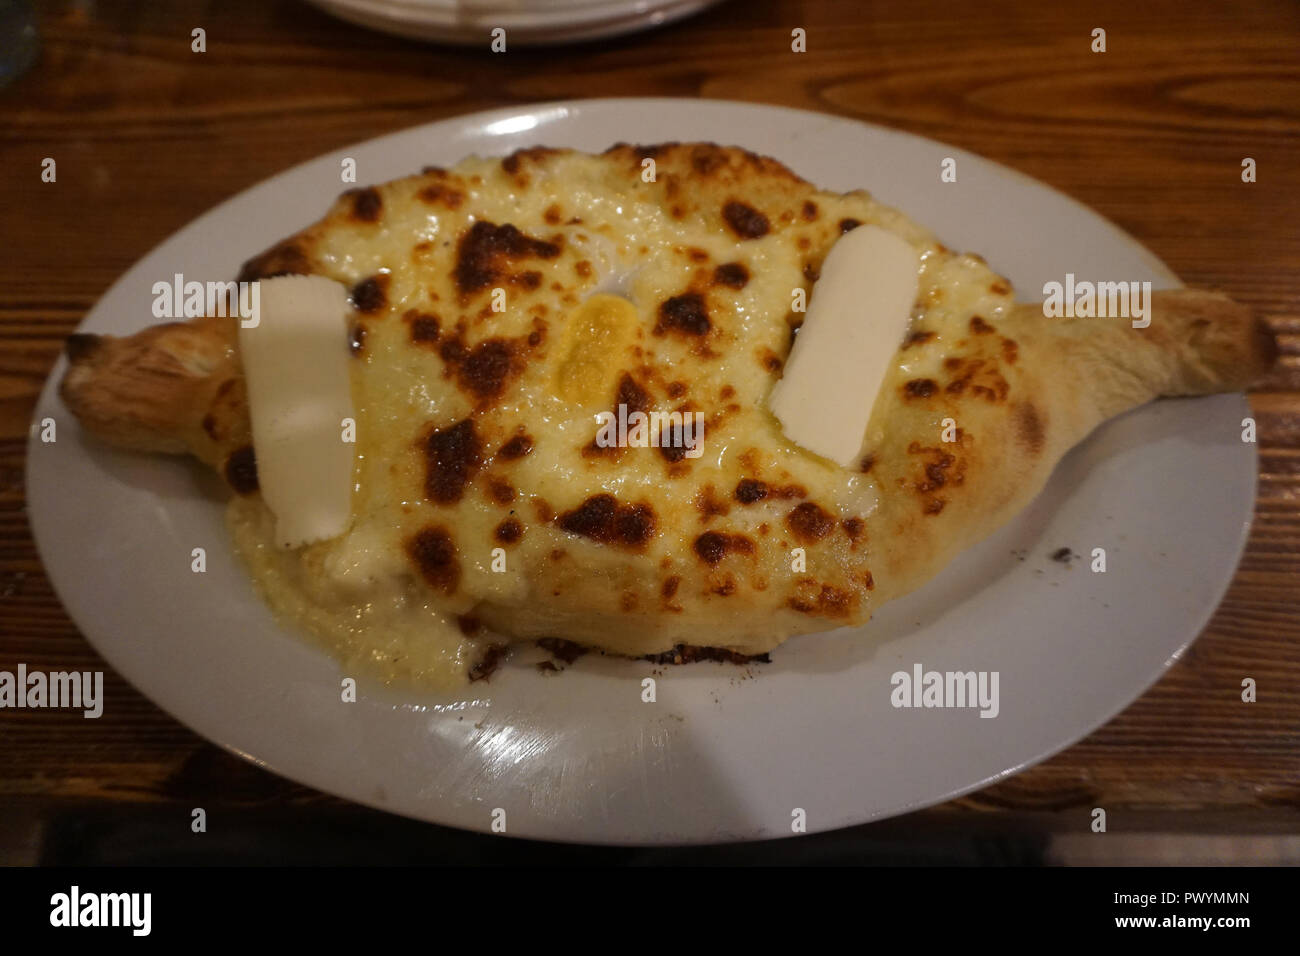 Georgian Traditional Khachapuri Ajaruli with Egg and Butter on a Plate Stock Photo